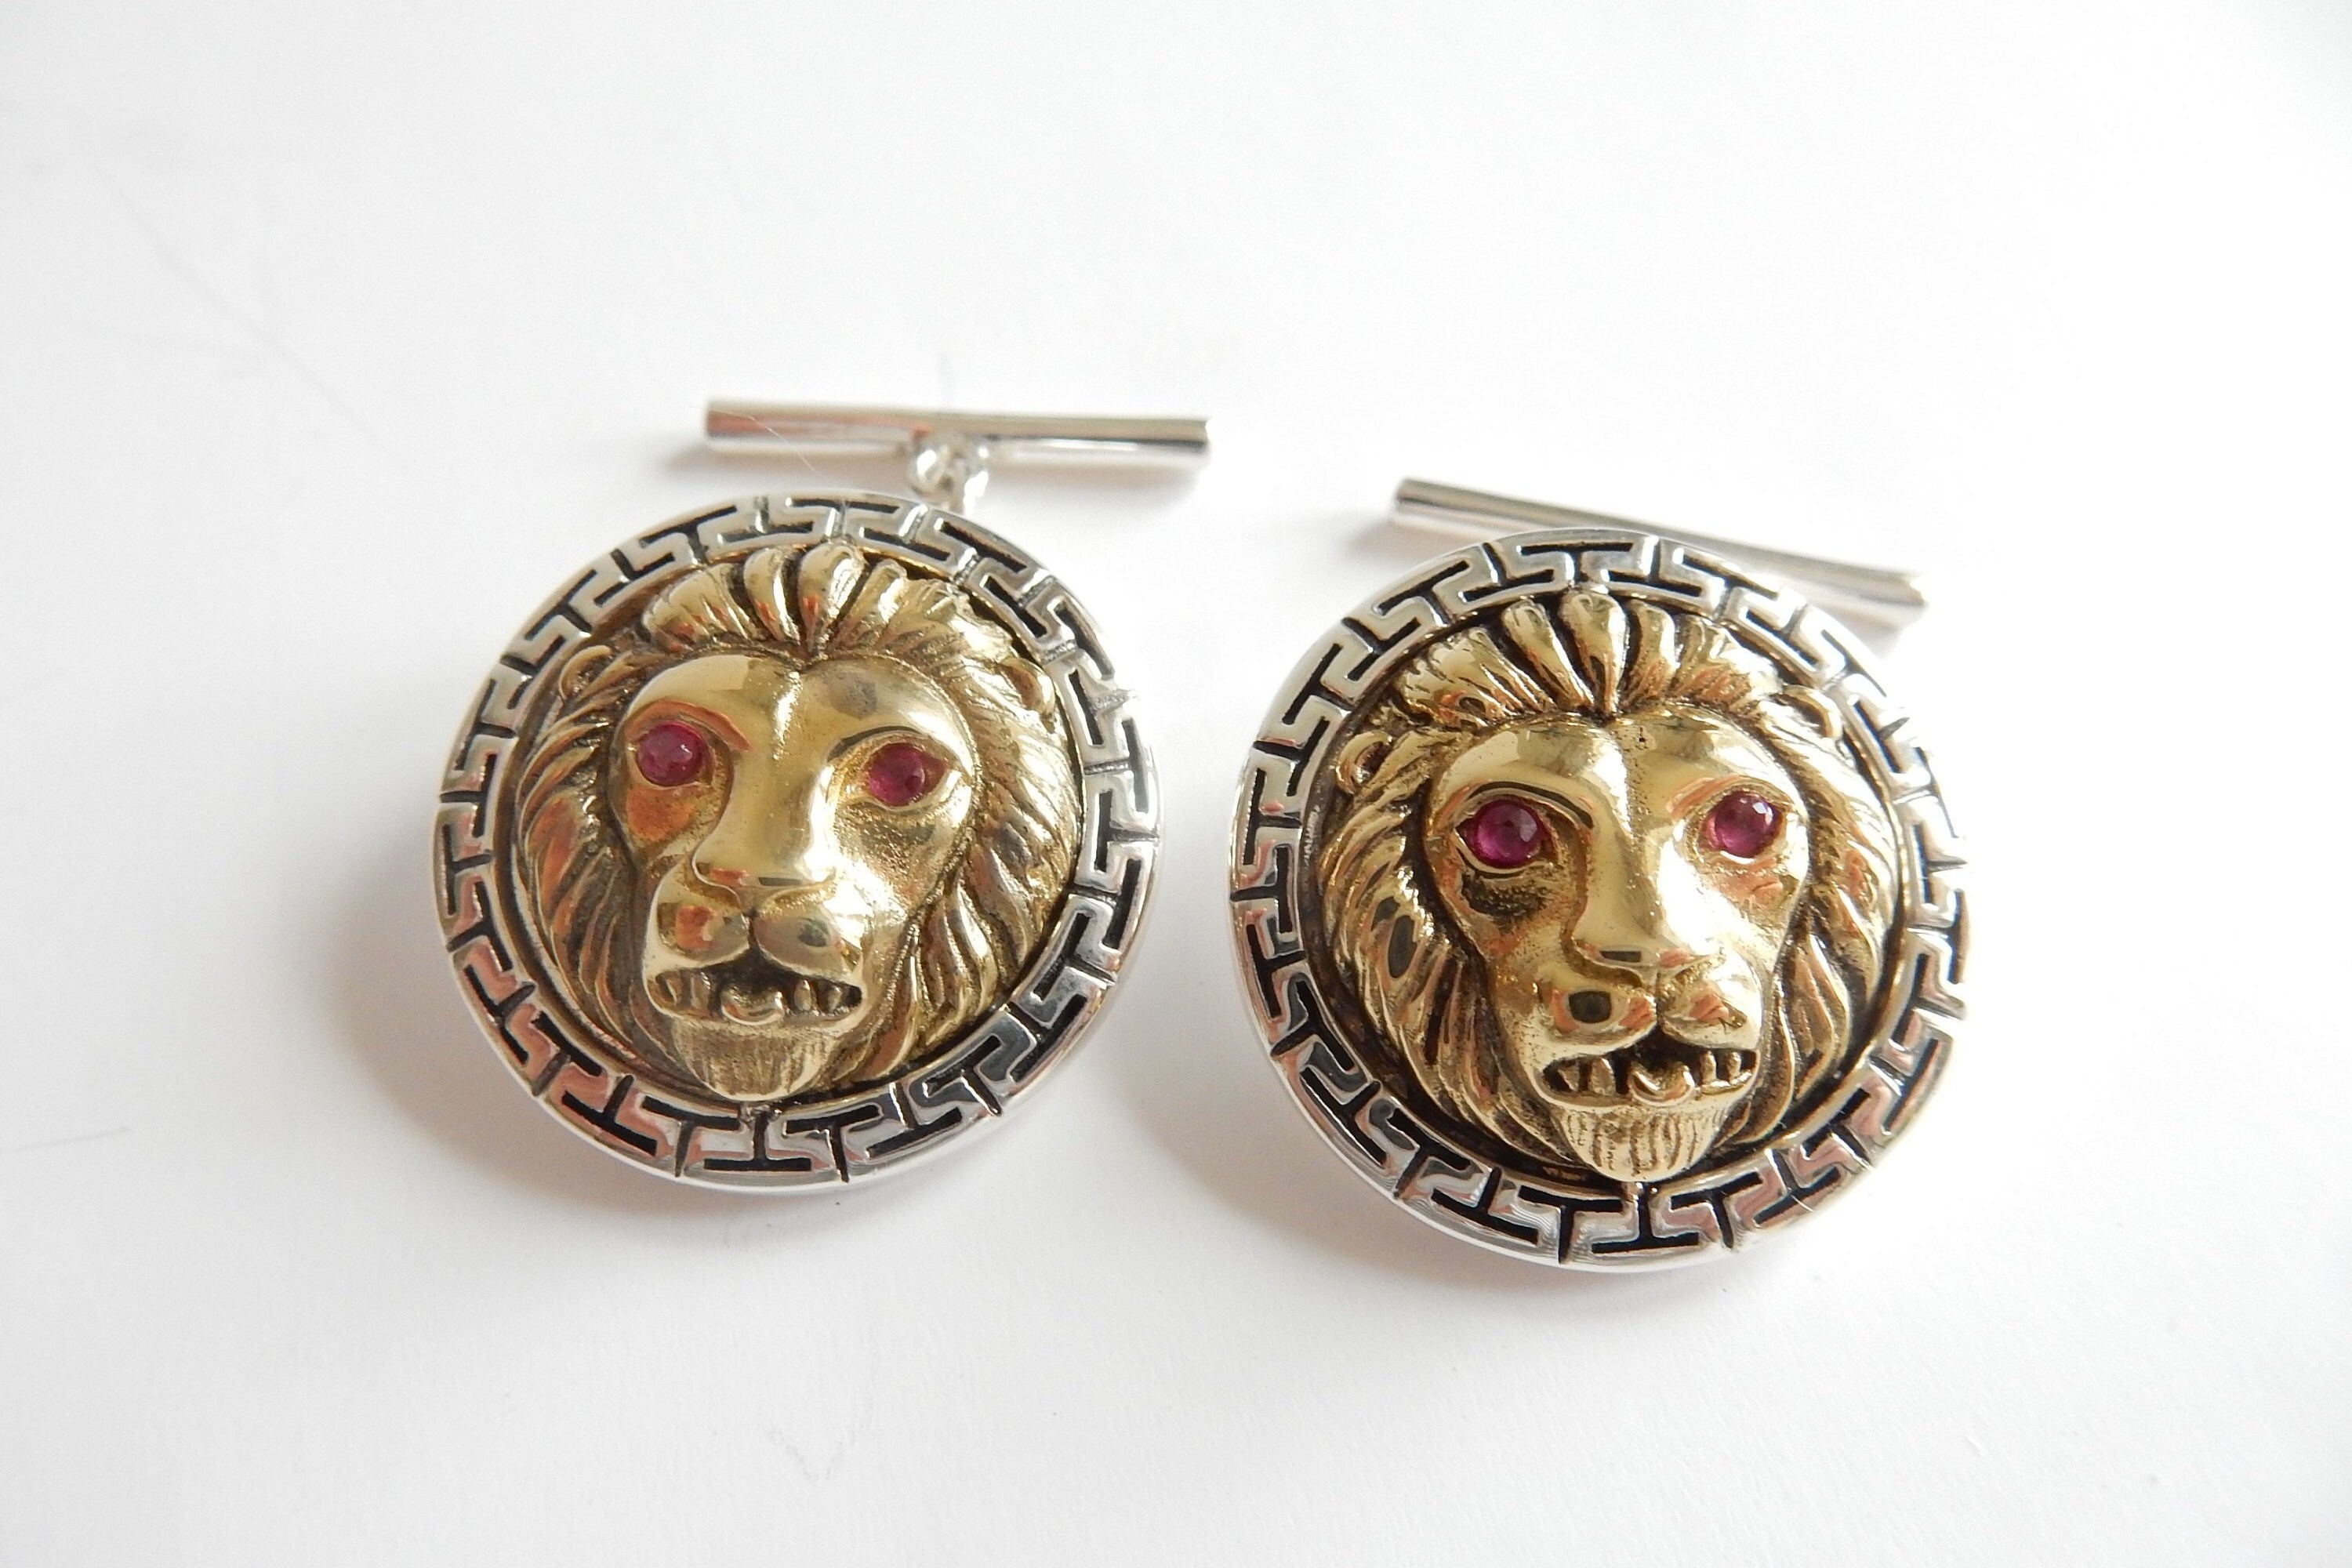 Authentic Gianni Versace Medusa Cufflinks gold plated